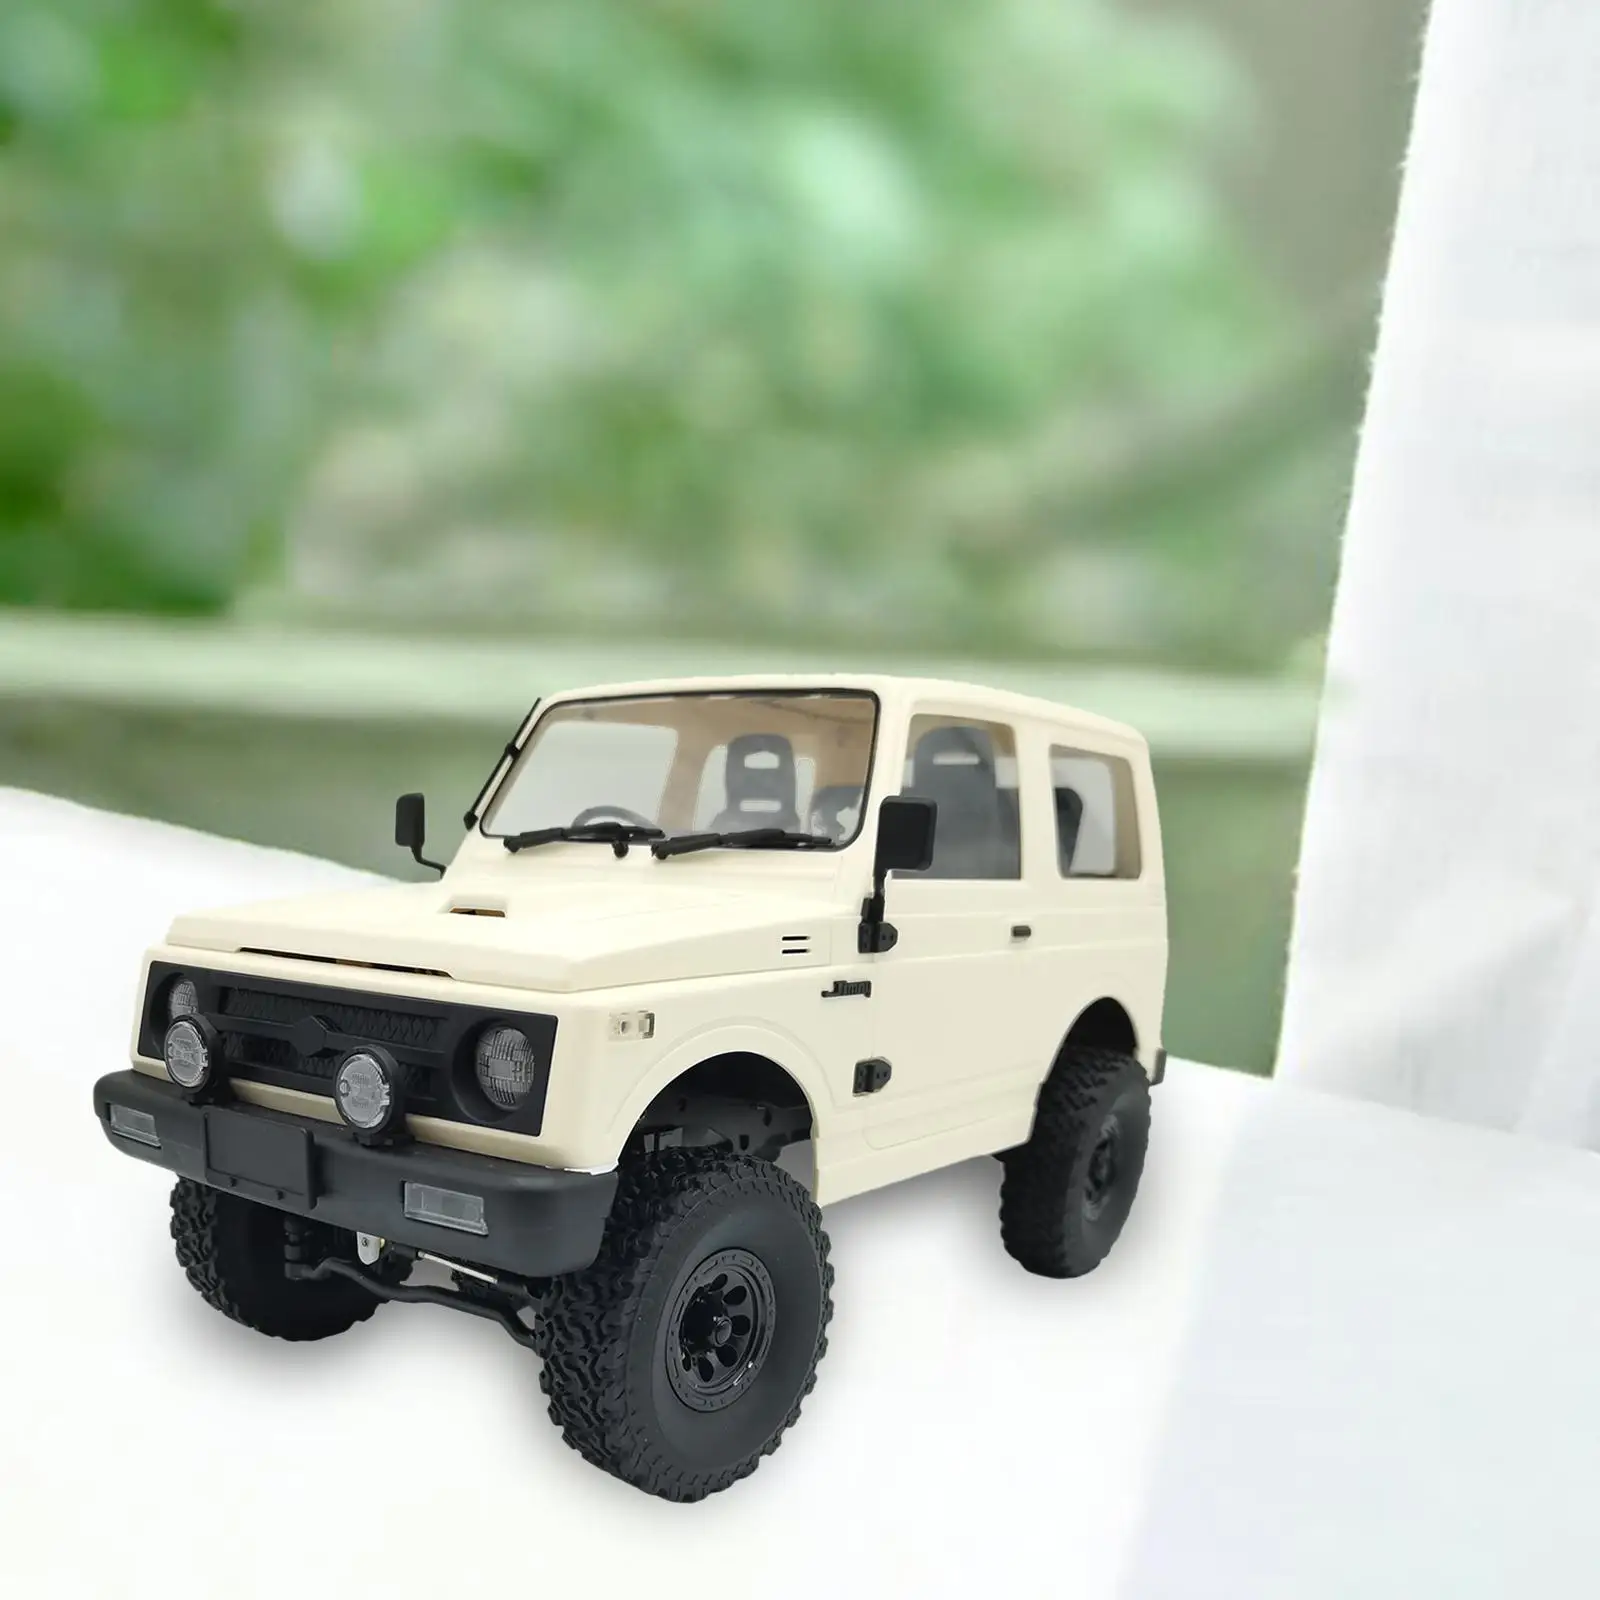 1/10 WL01 RC Car Toy 4WD C74 Remote Control Electric Toy Simulation Climbing Truck for Children Adults Boy Kid Birthday Gifts